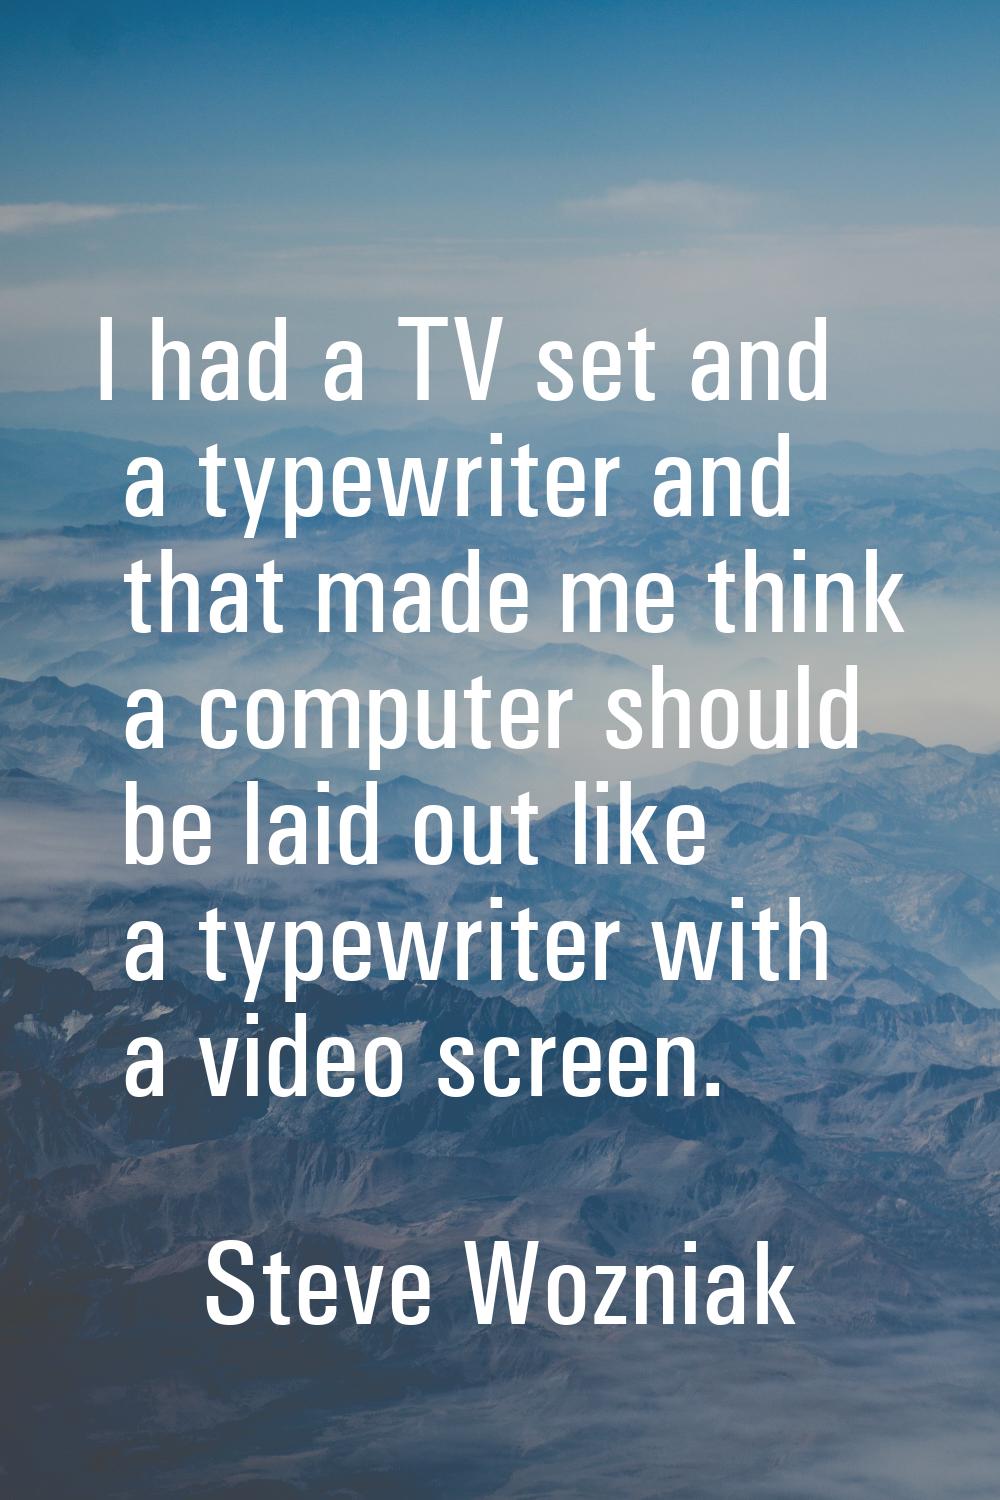 I had a TV set and a typewriter and that made me think a computer should be laid out like a typewri